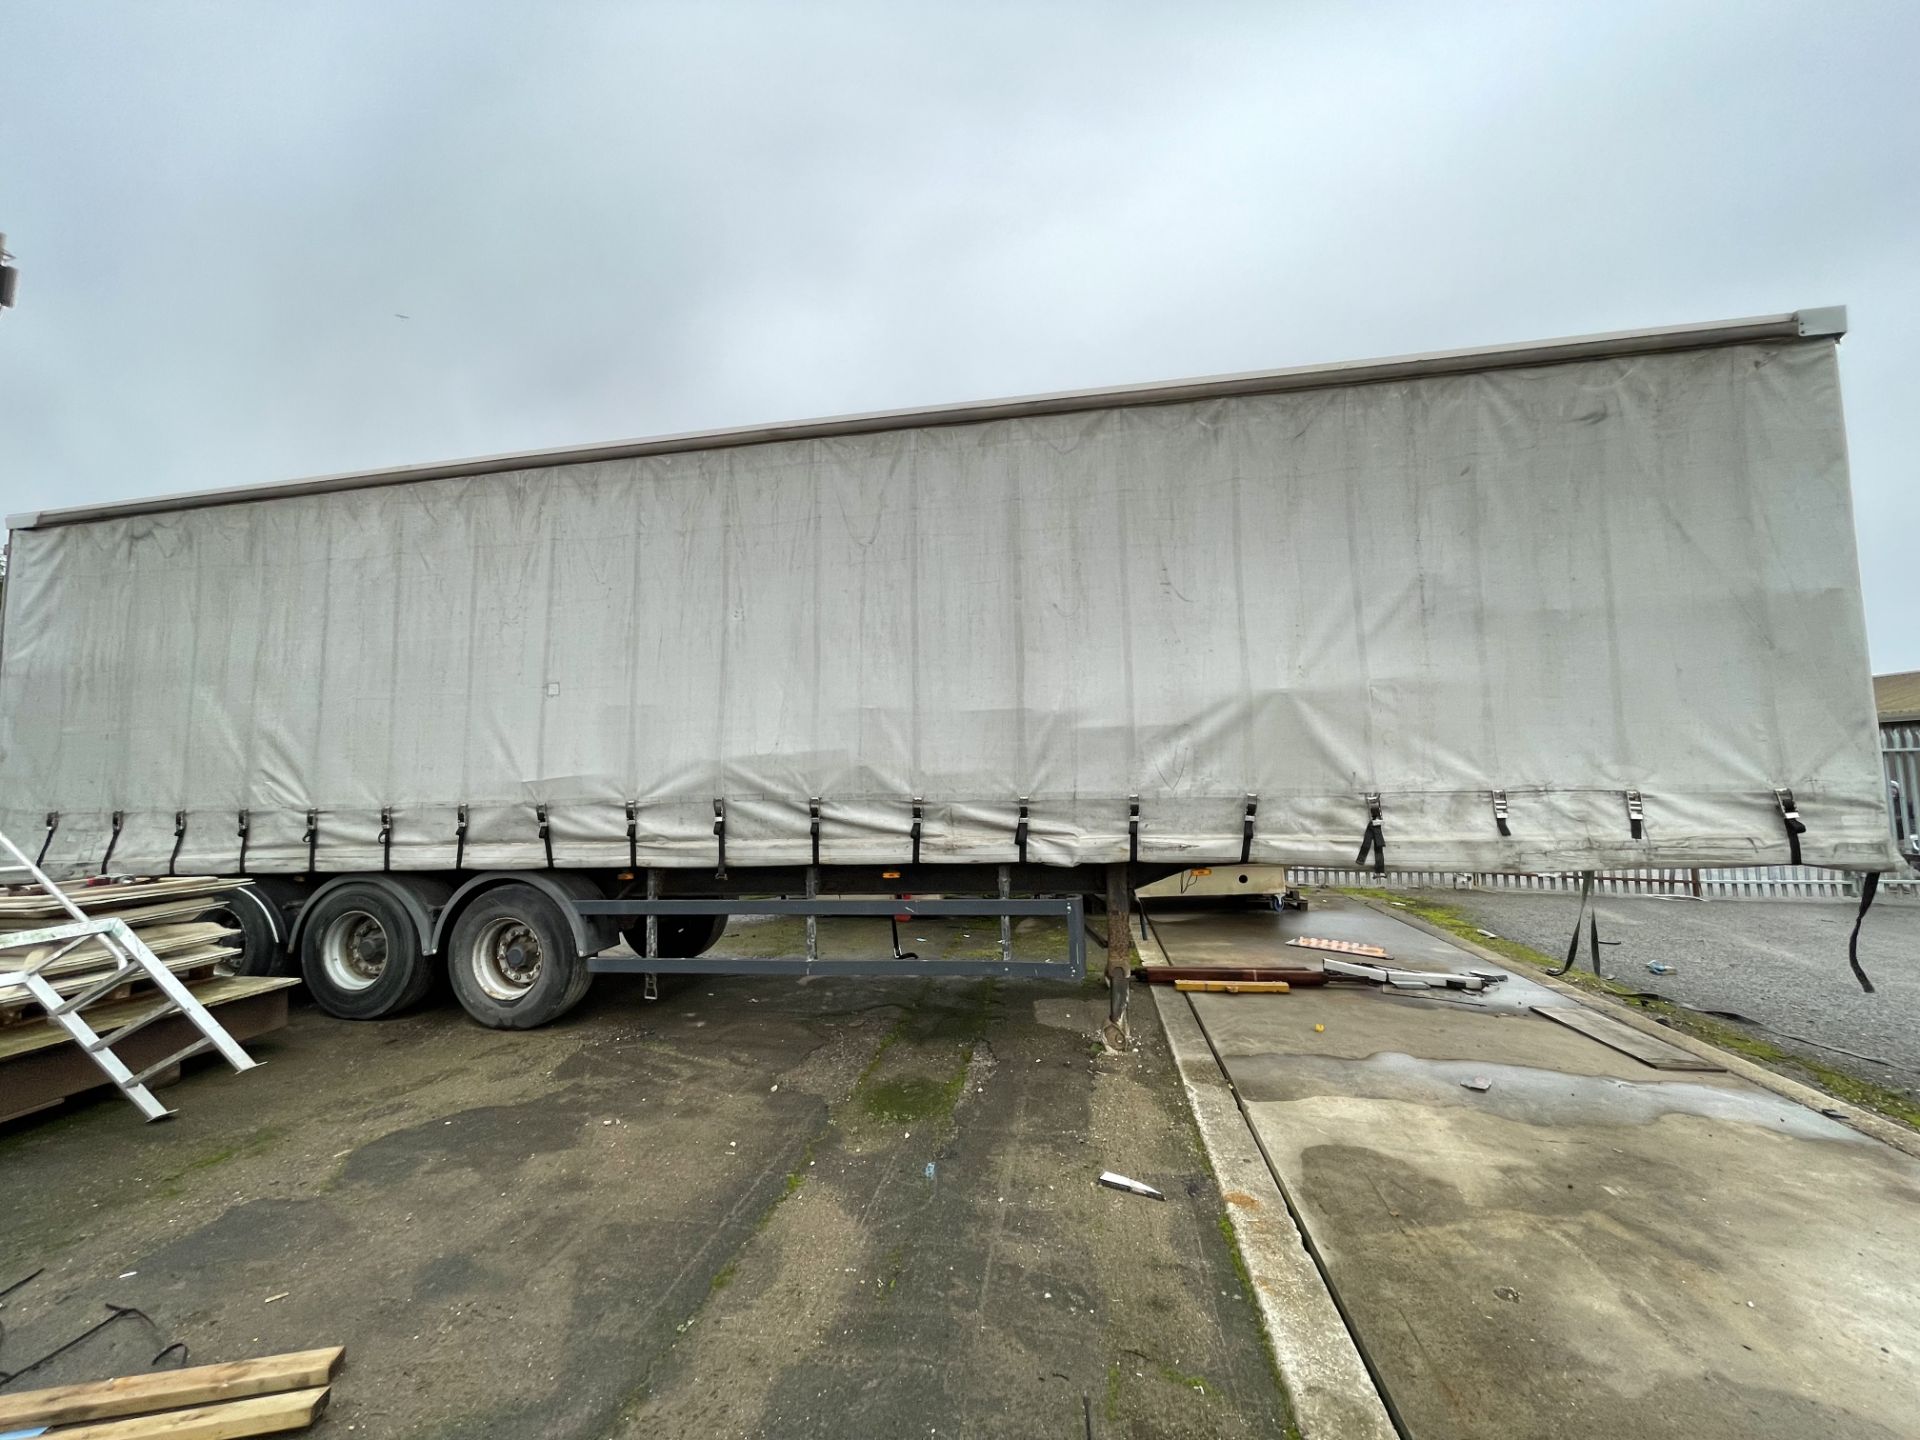 2005 SDC Trailers 45' Artic Curtainside Tri-Axle Trailer with Rear Barn Doors, Design Weight: 39, - Image 11 of 13